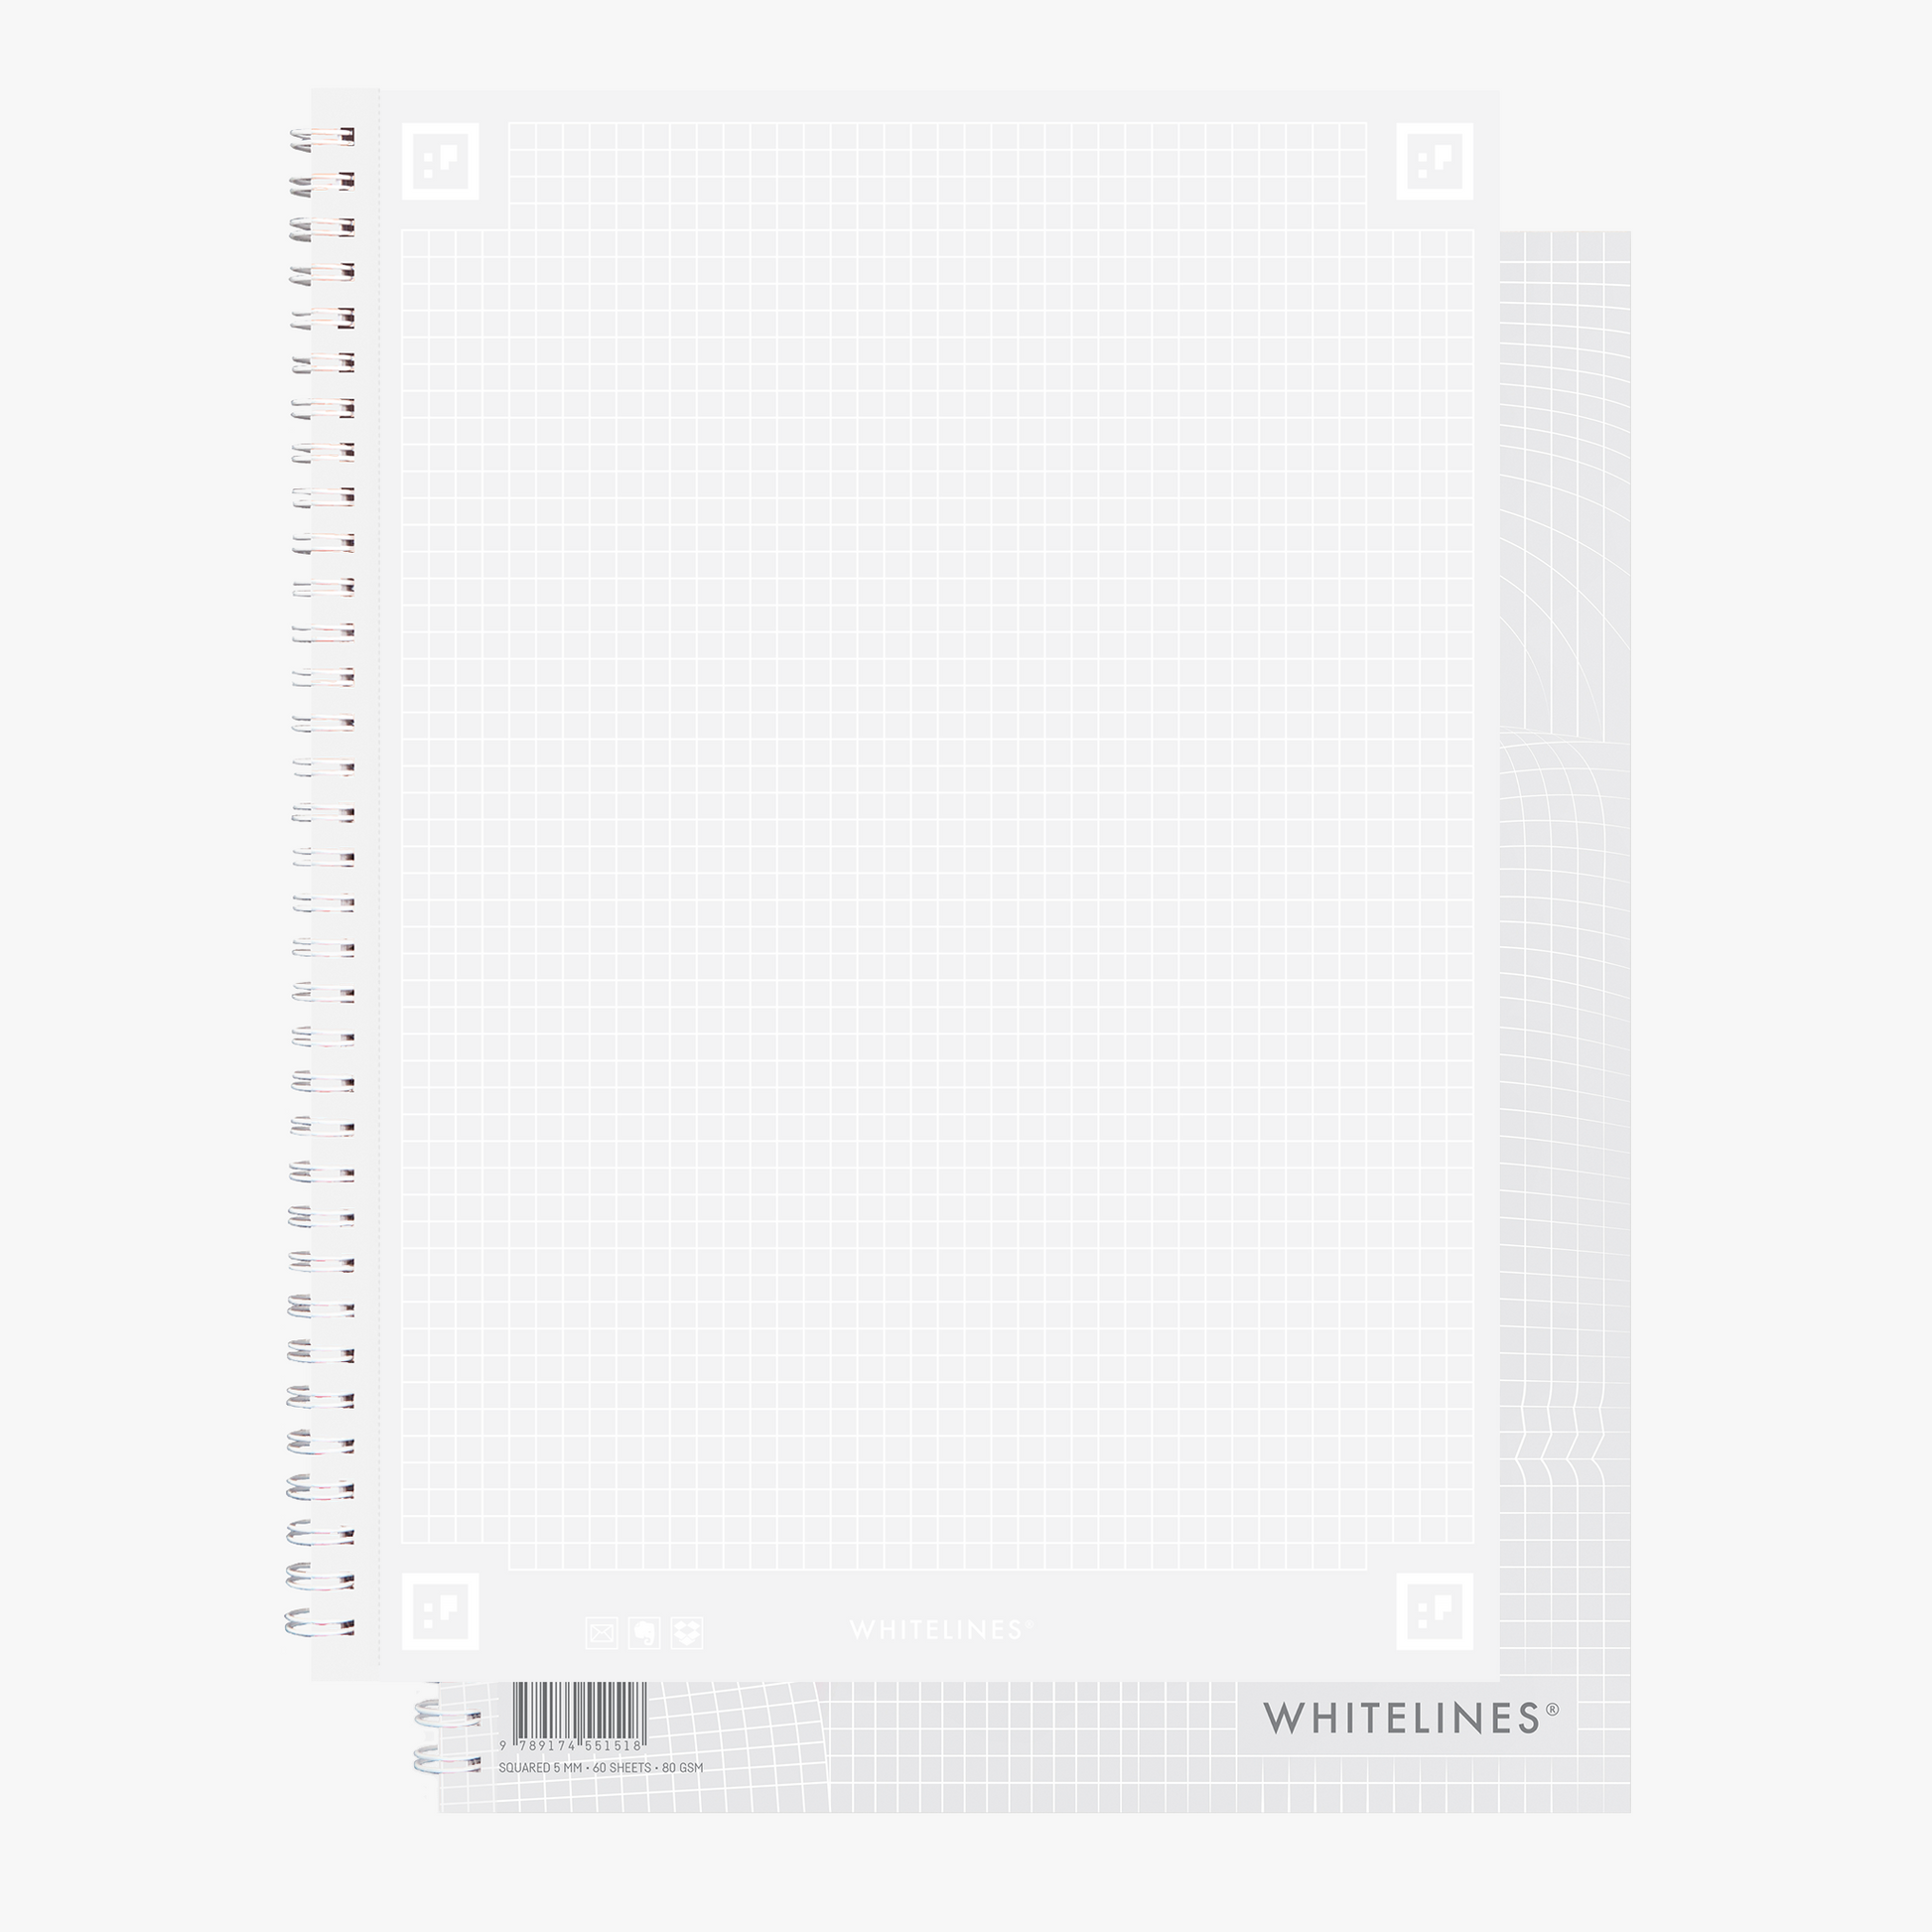 Whitelines Revelations A4 Graphed/Squared Notebook perfect for writing, sketching, journaling, drawing, working and studying effectively